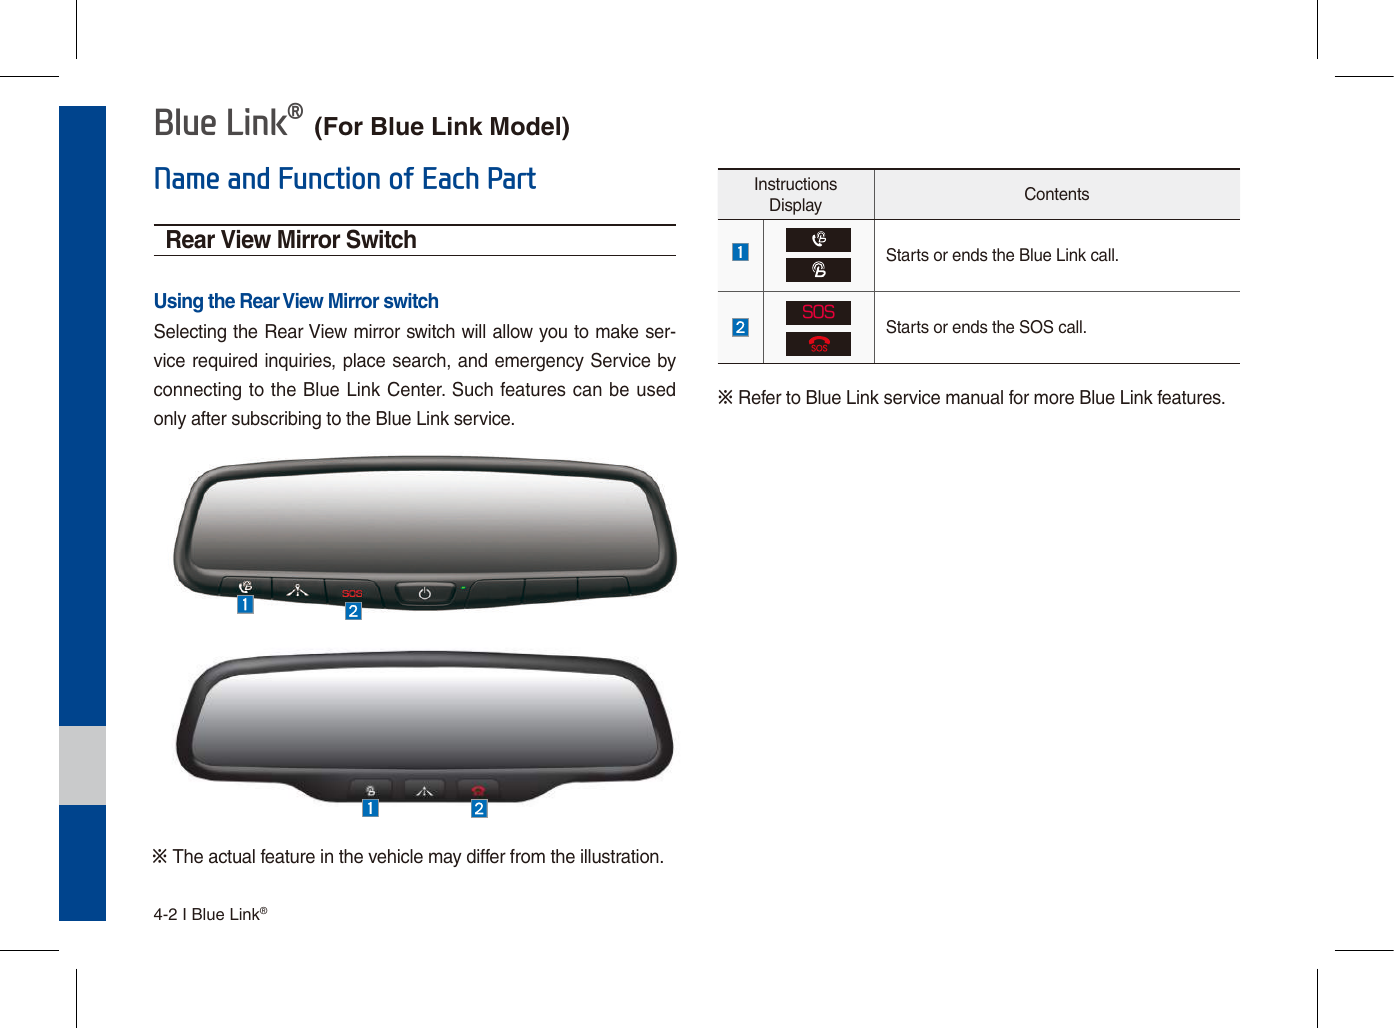 4-2 I Blue Link® Blue Link®Rear View Mirror SwitchUsing the Rear View Mirror switchSelecting the Rear View mirror switch will allow you to make ser-vice required inquiries, place search, and emergency Service by connecting to the Blue Link Center. Such features can be used only after subscribing to the Blue Link service.Instructions Display ContentsStarts or ends the Blue Link call.SOSStarts or ends the SOS call.※ Refer to Blue Link service manual for more Blue Link features.Name and Function of Each Part※ The actual feature in the vehicle may differ from the illustration.(For Blue Link Model)